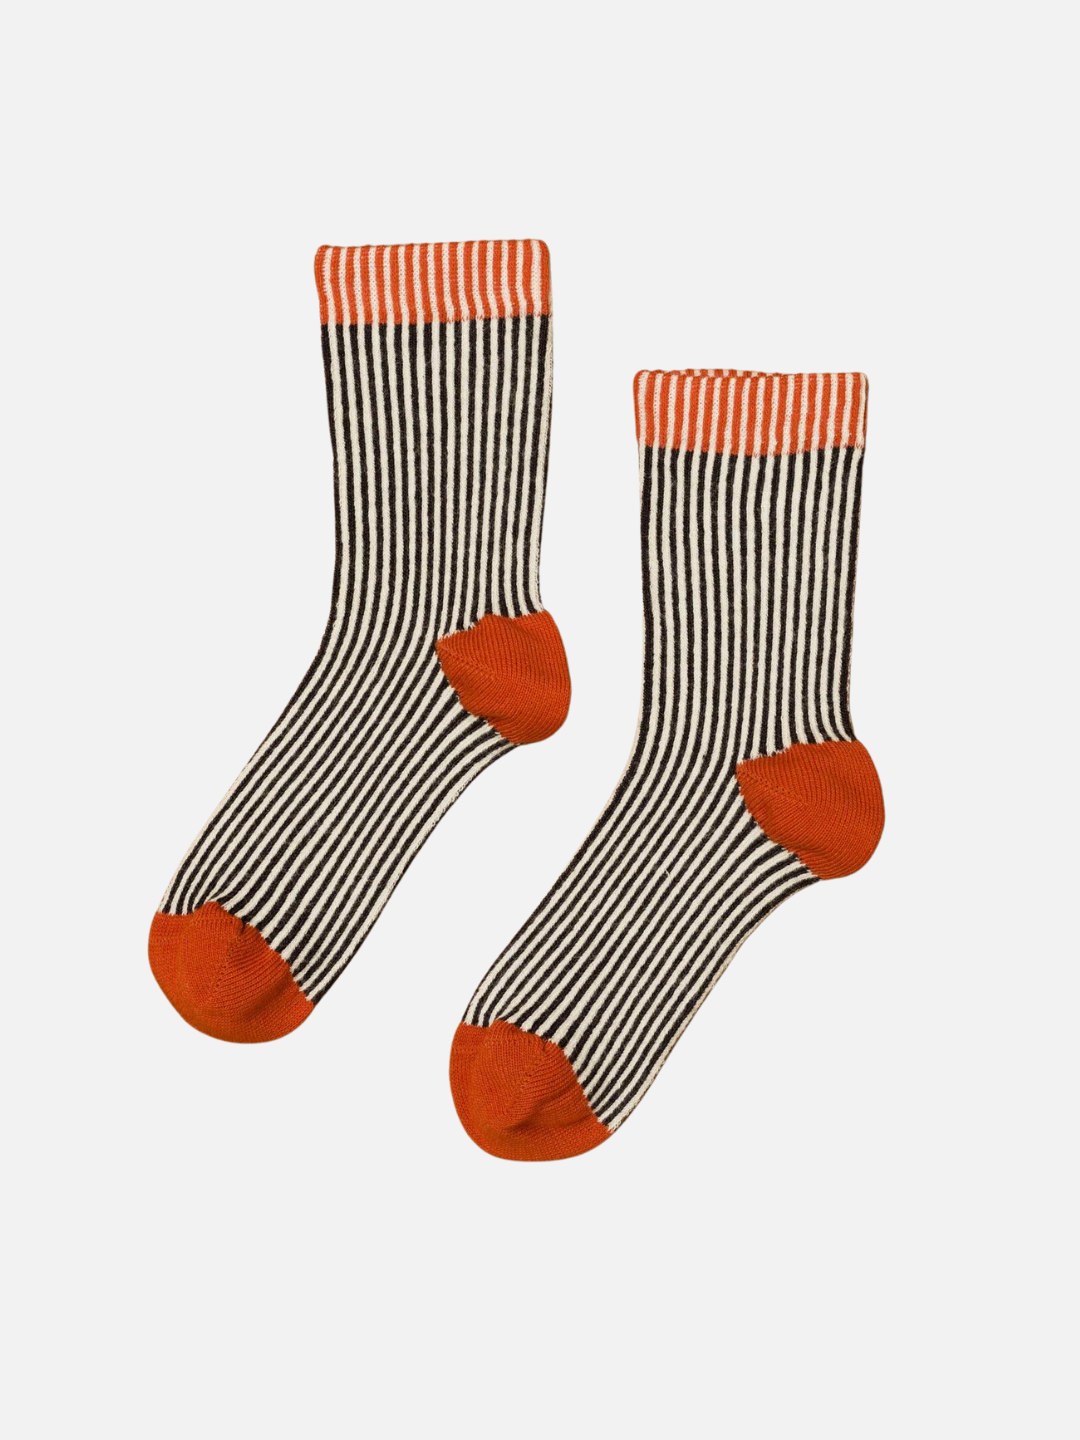 Black | A pair of kids' ankle socks in black and cream stripes, with orange and cream tops and solid orange toes and heels